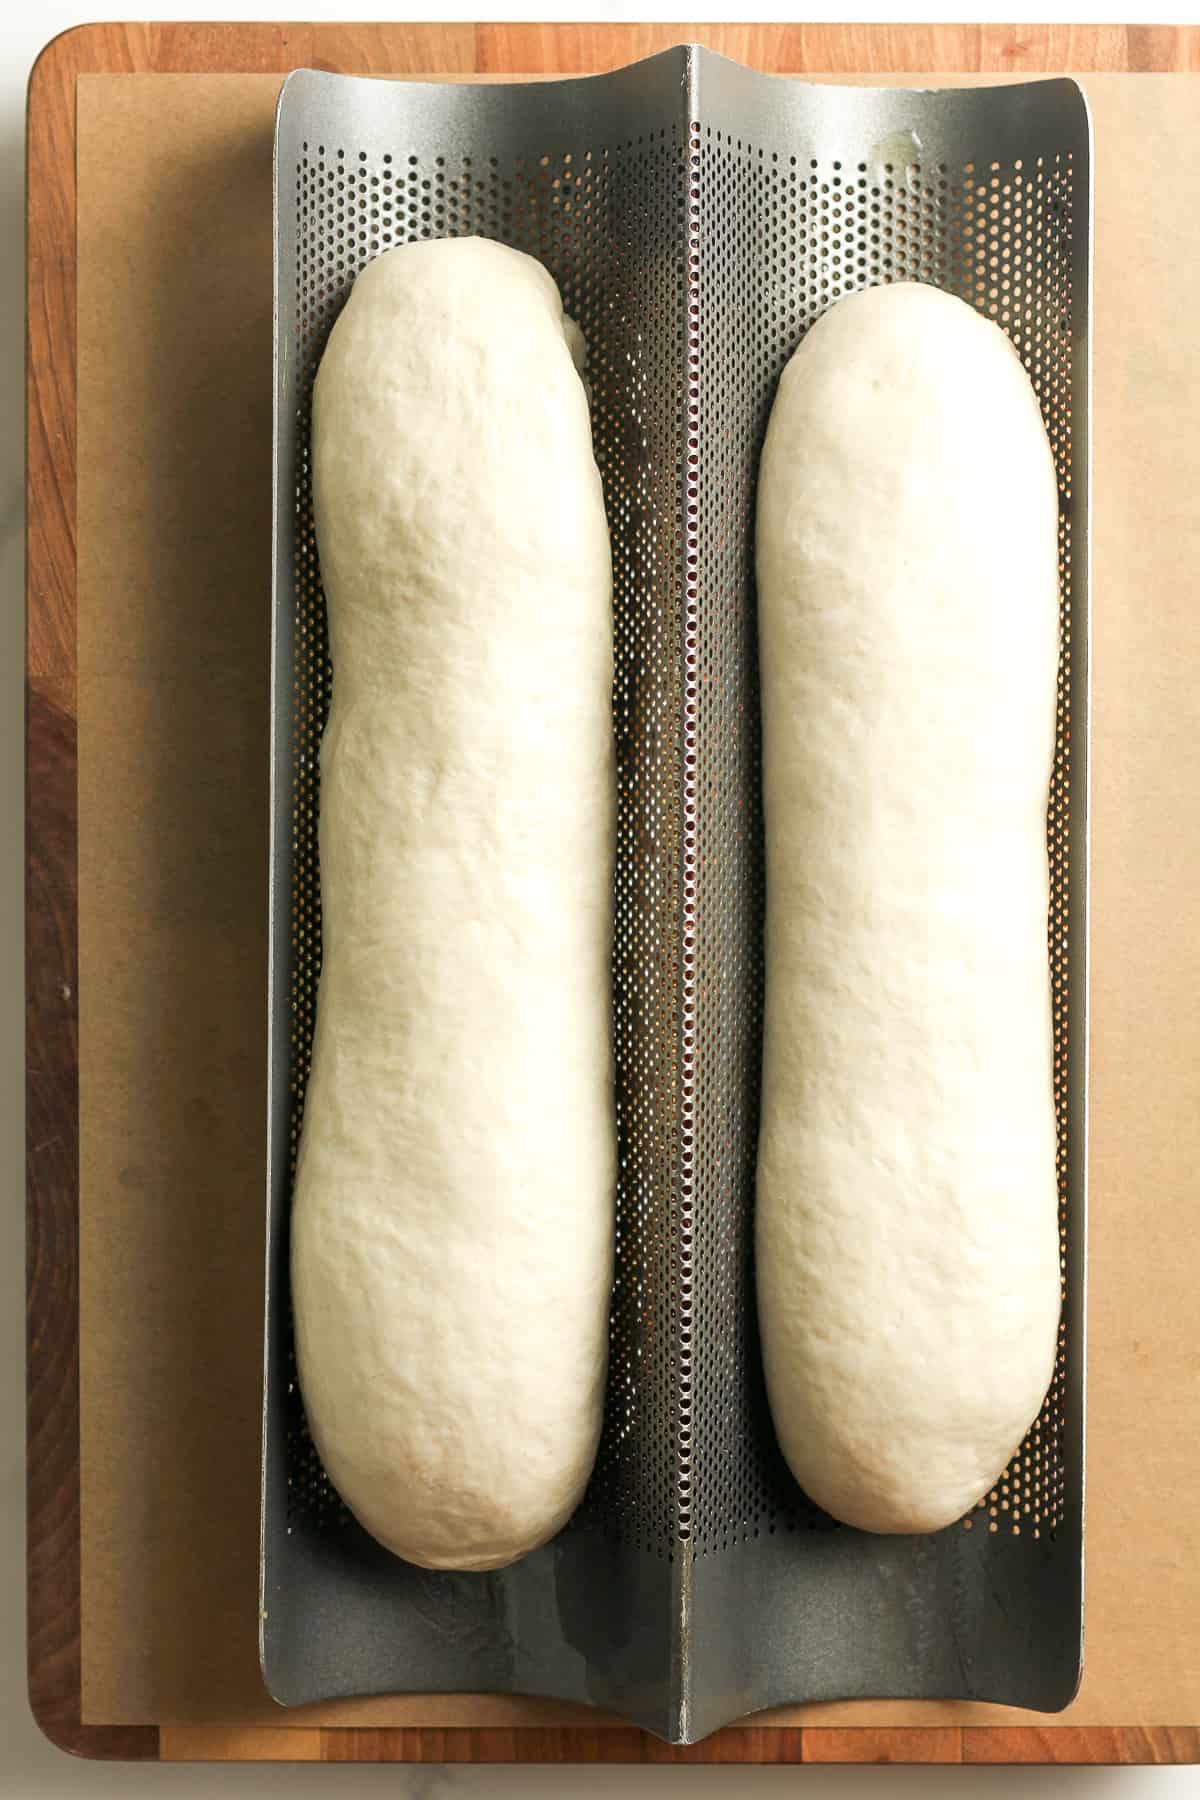 The bread loafs formed on pan.